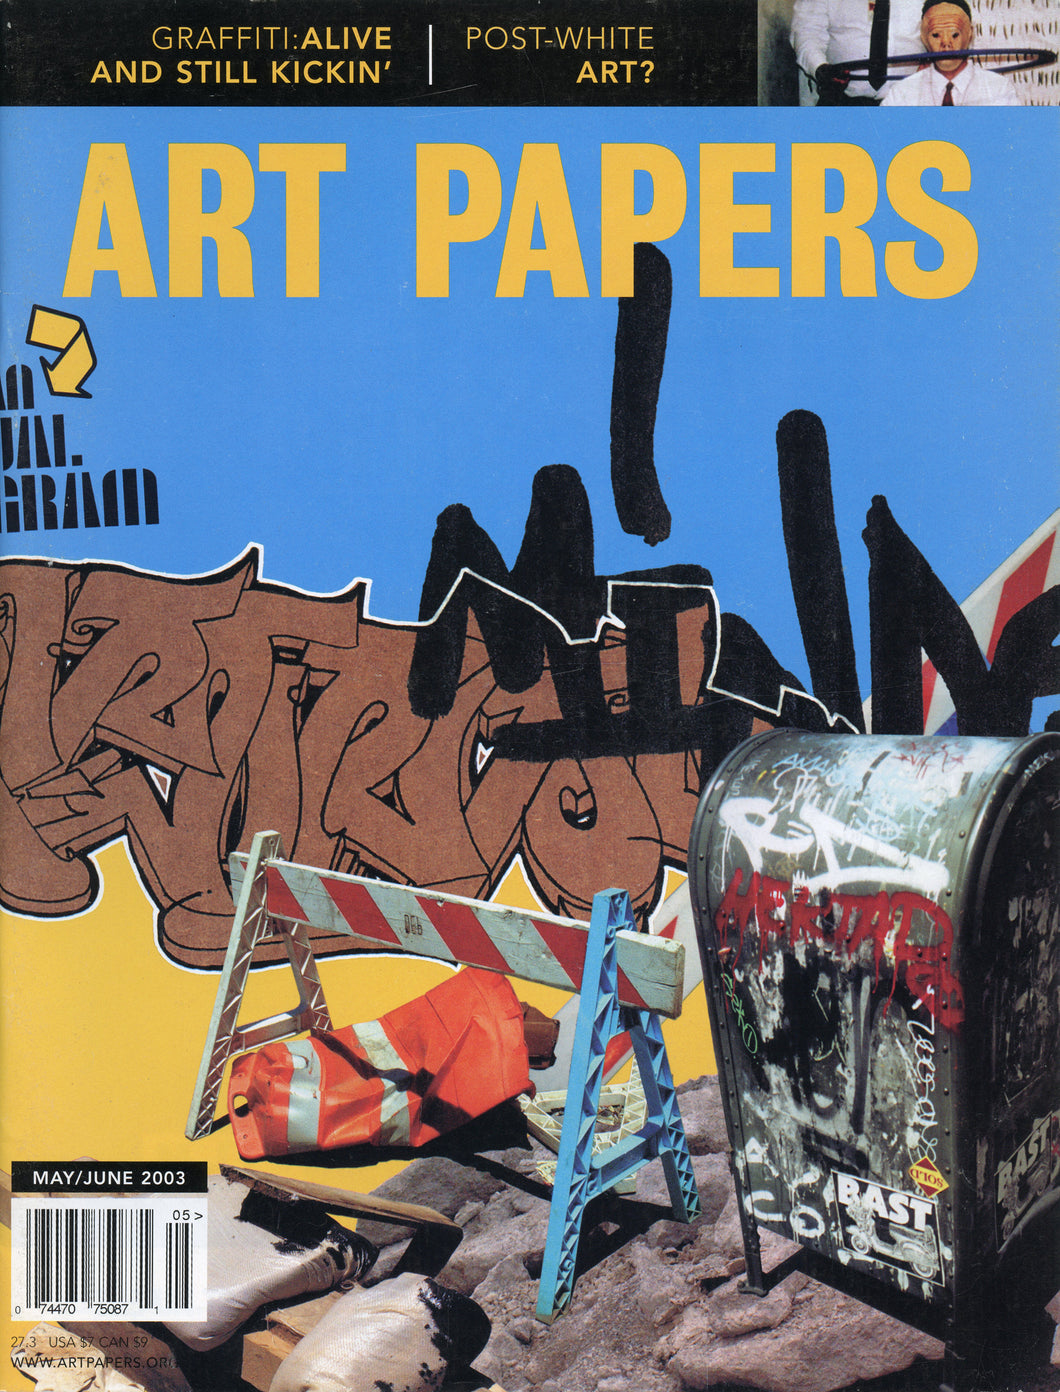 ART PAPERS 27.03 - May/June 2003 - SOLD OUT